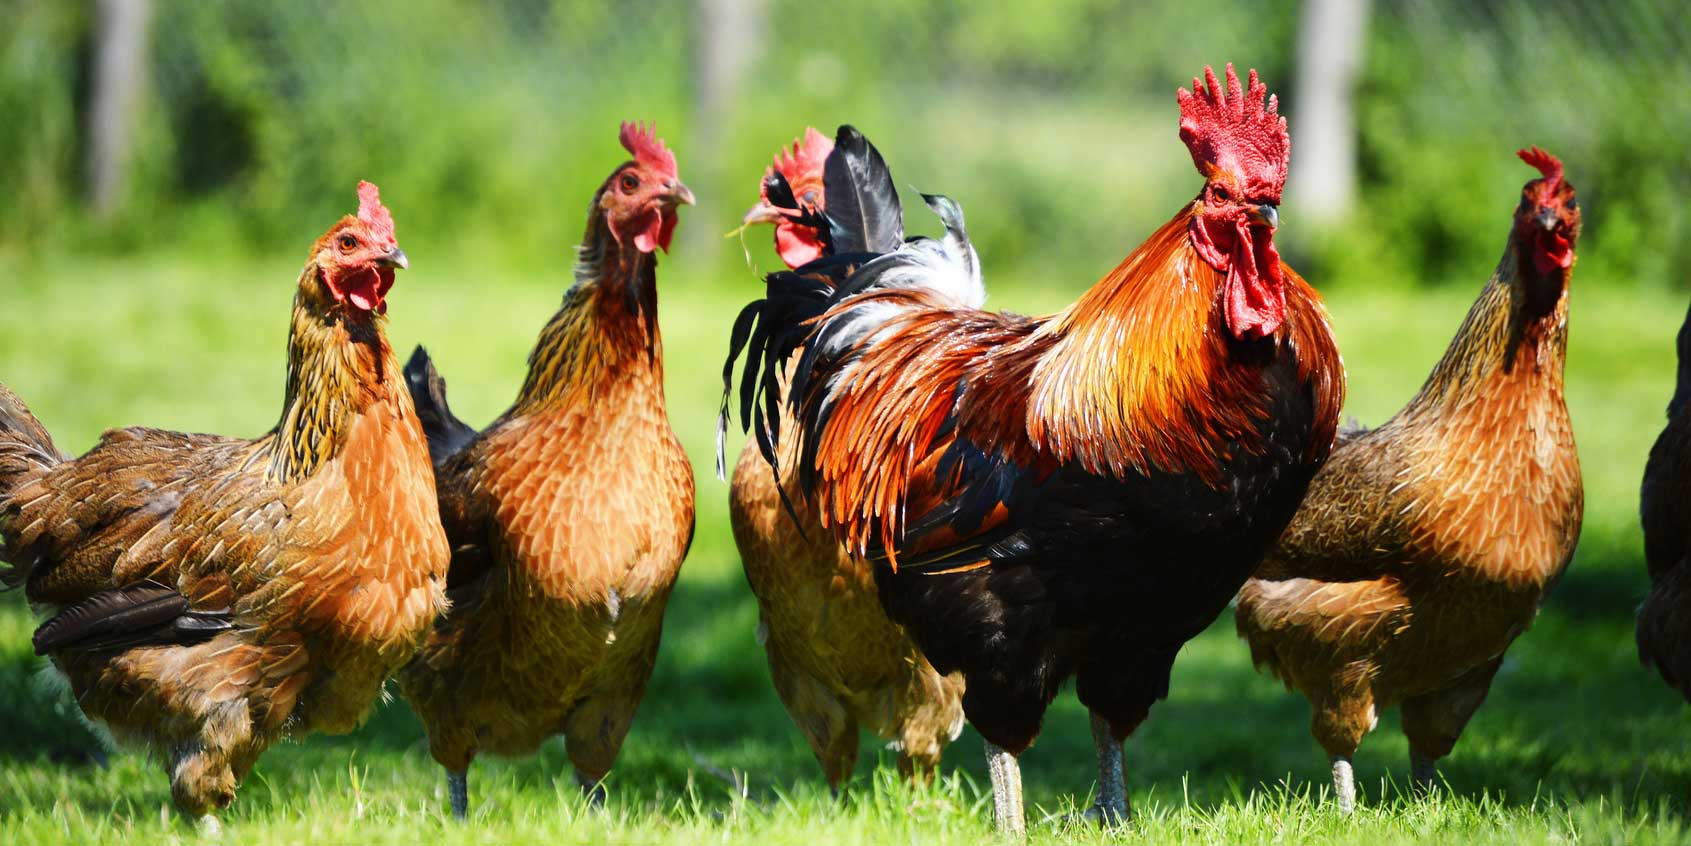 7 Very Interesting Facts About Chickens and Mosquitoes